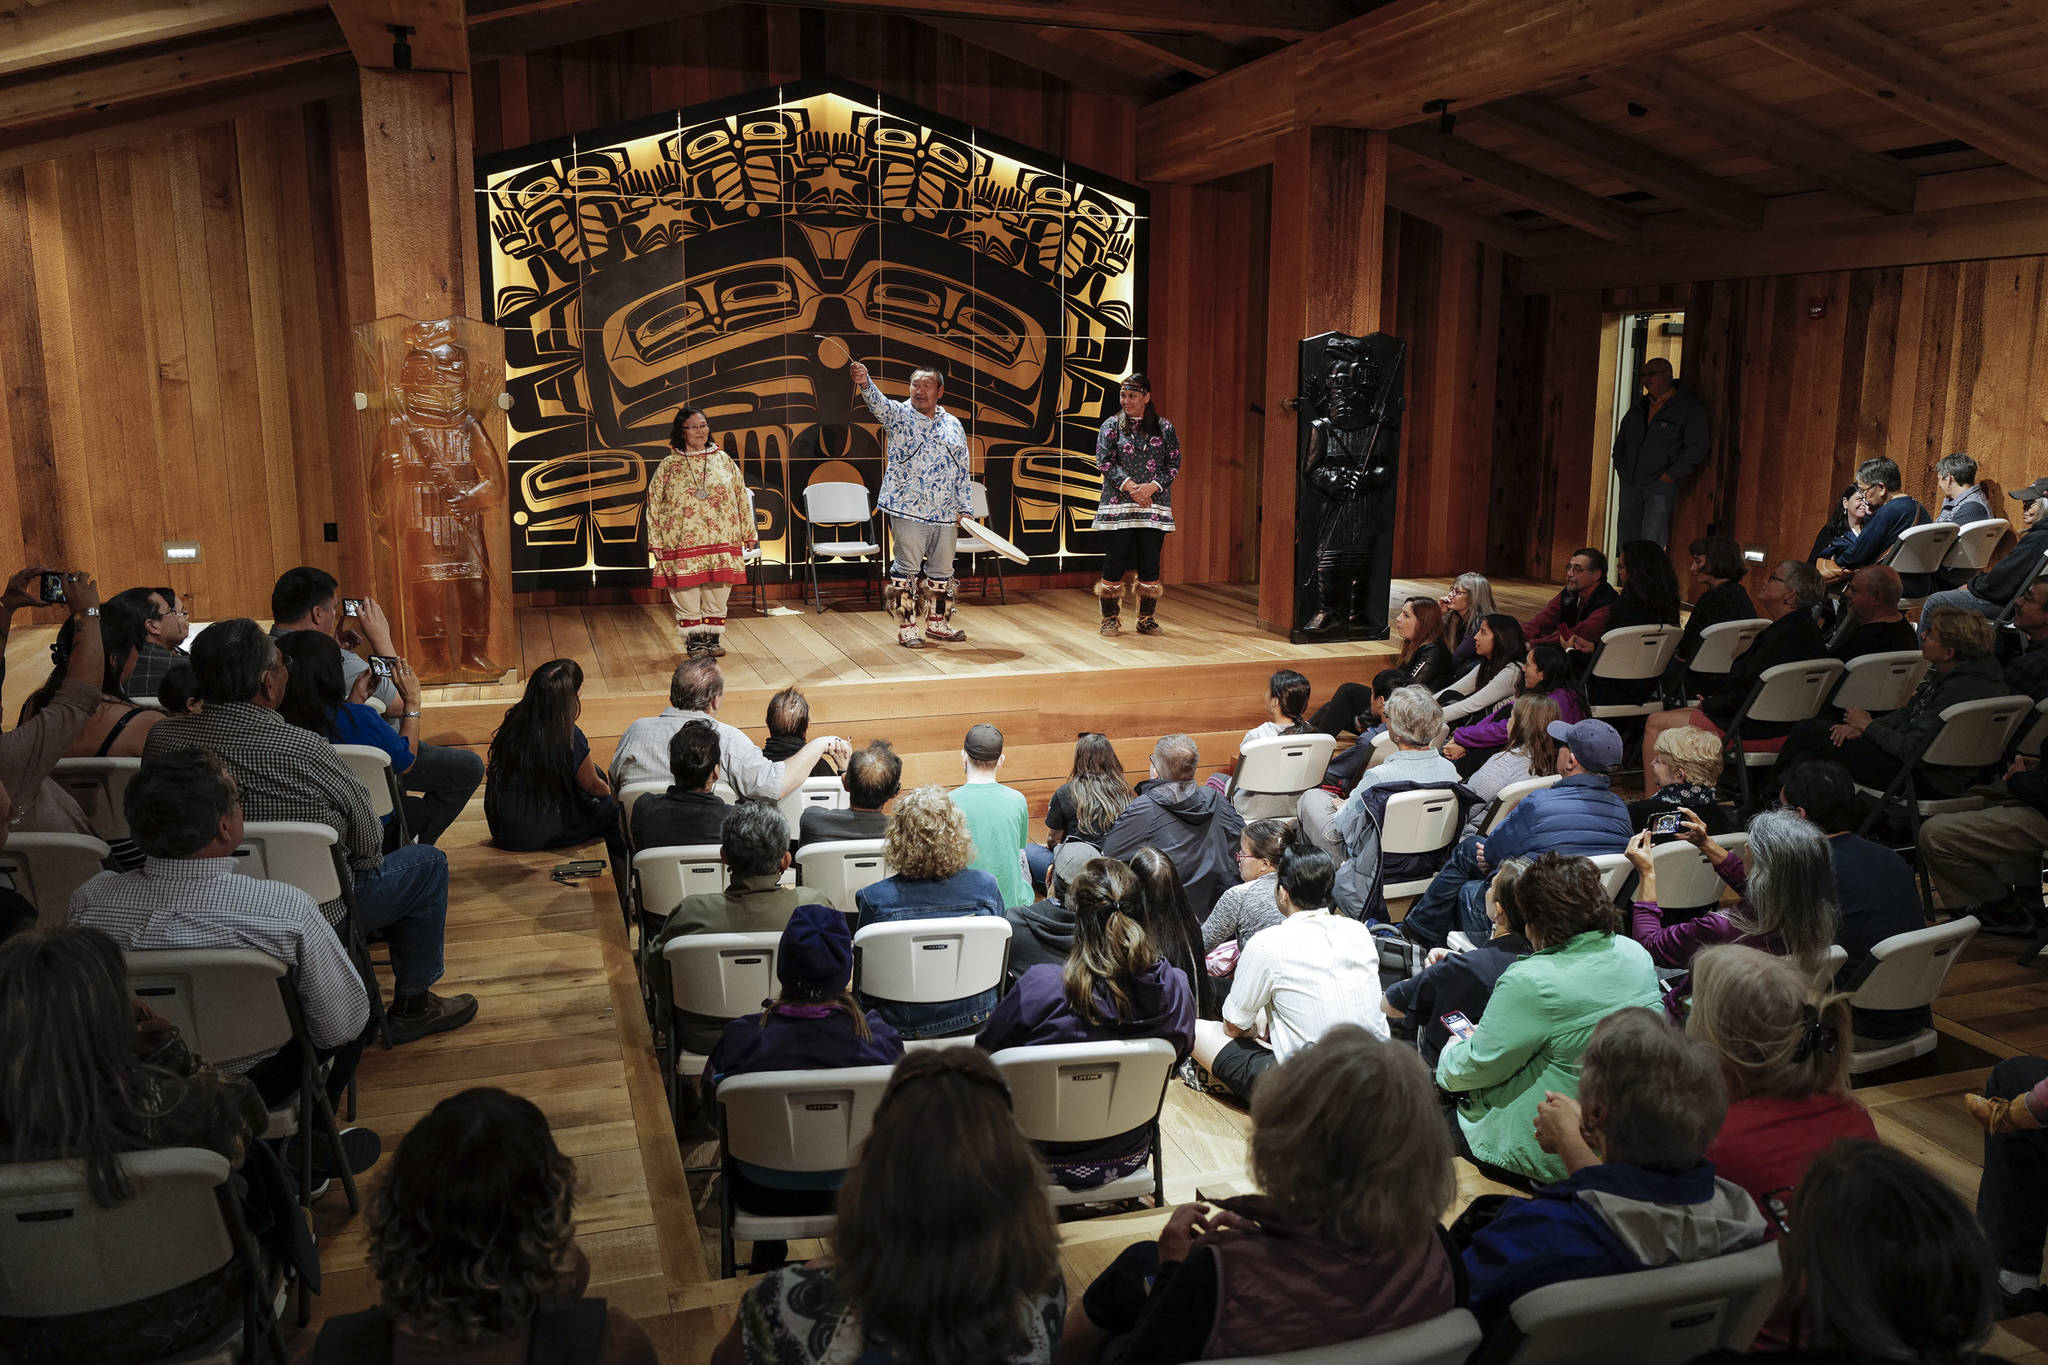 Sealaska Heritage Institute Artists-in-Residence John Waghiyi and his wife, Arlene Annogiyuk Waghiyi, from Savoonga, perform St. Lawrence Island dancing and song with their niece, Rana Mokiyuk, right, at the Walter Soboleff Center on Wednesday, Aug. 28, 2019. (Michael Penn | Juneau Empire)